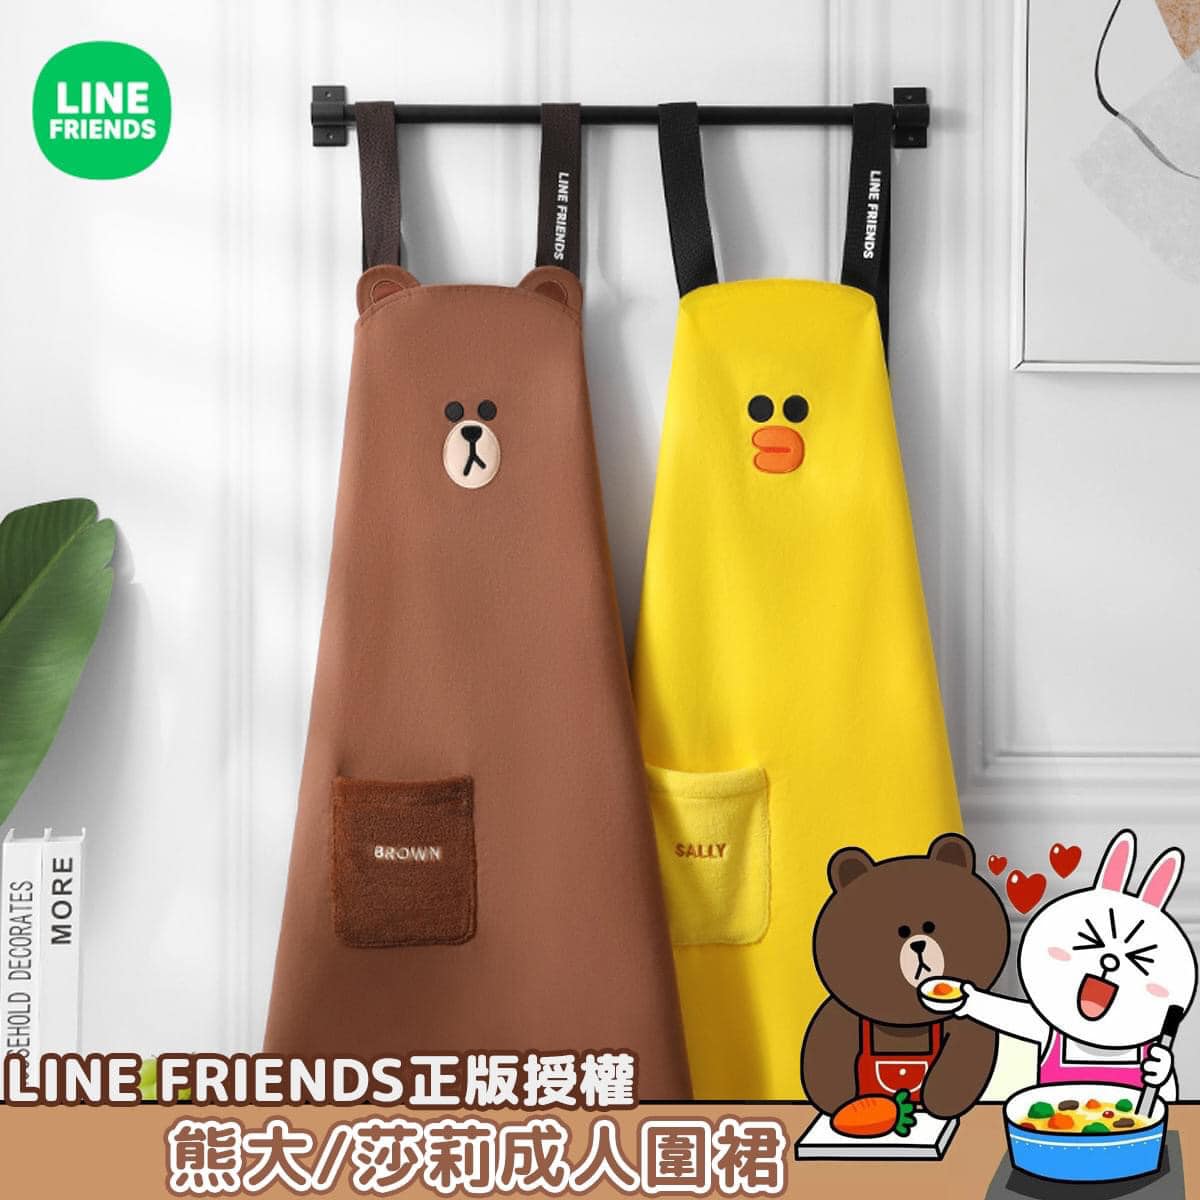 Apron - Line Friends Brown / Sally